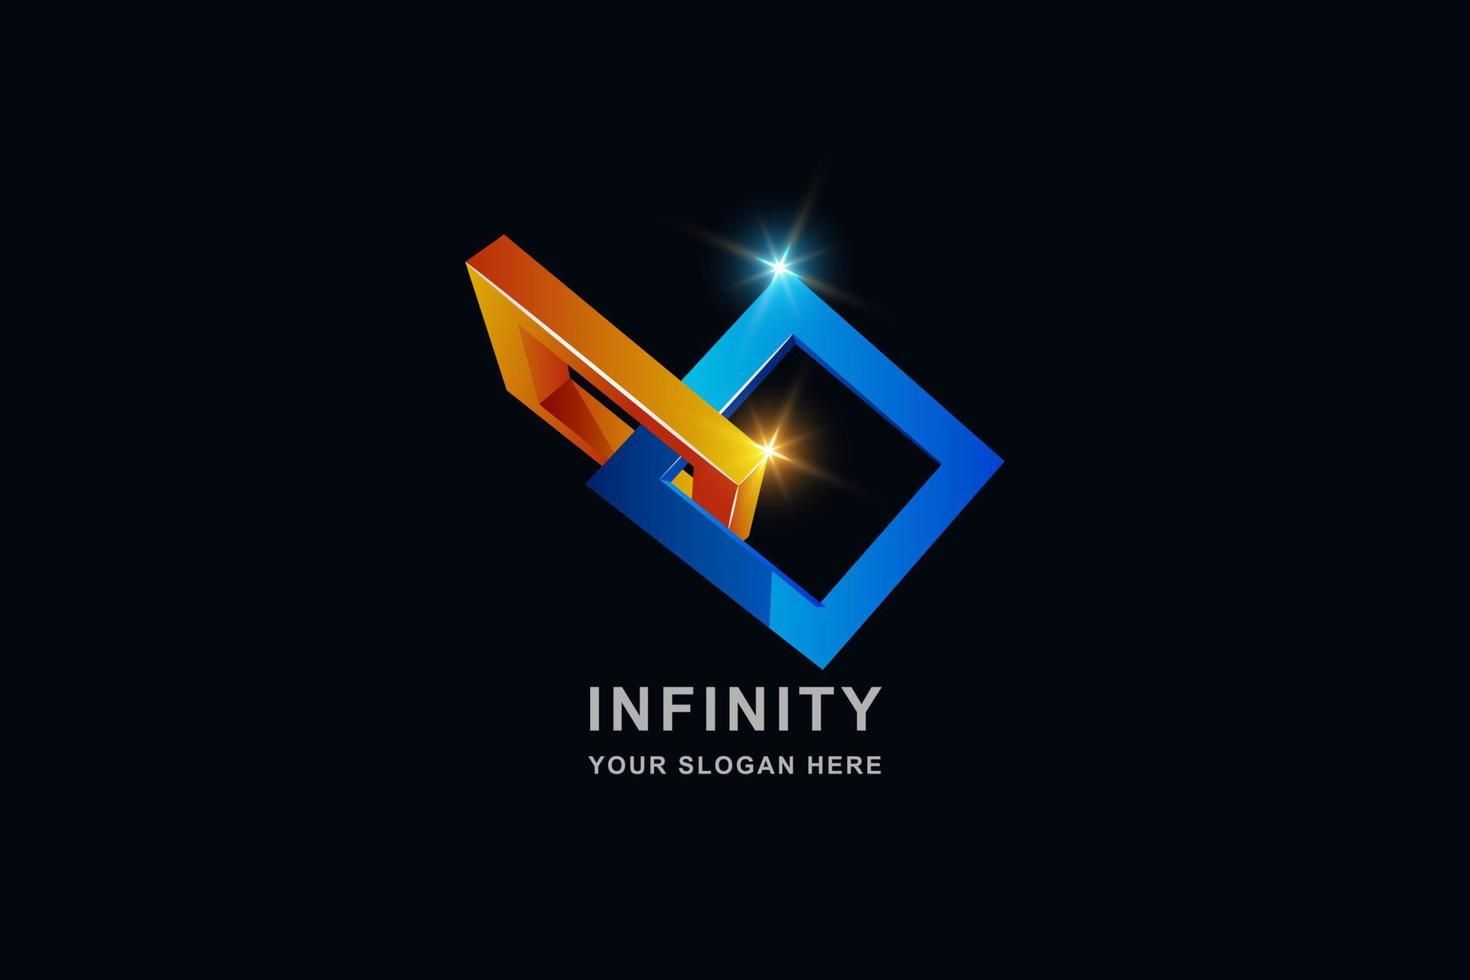 Infinity or 3D Frame square logo design template vector